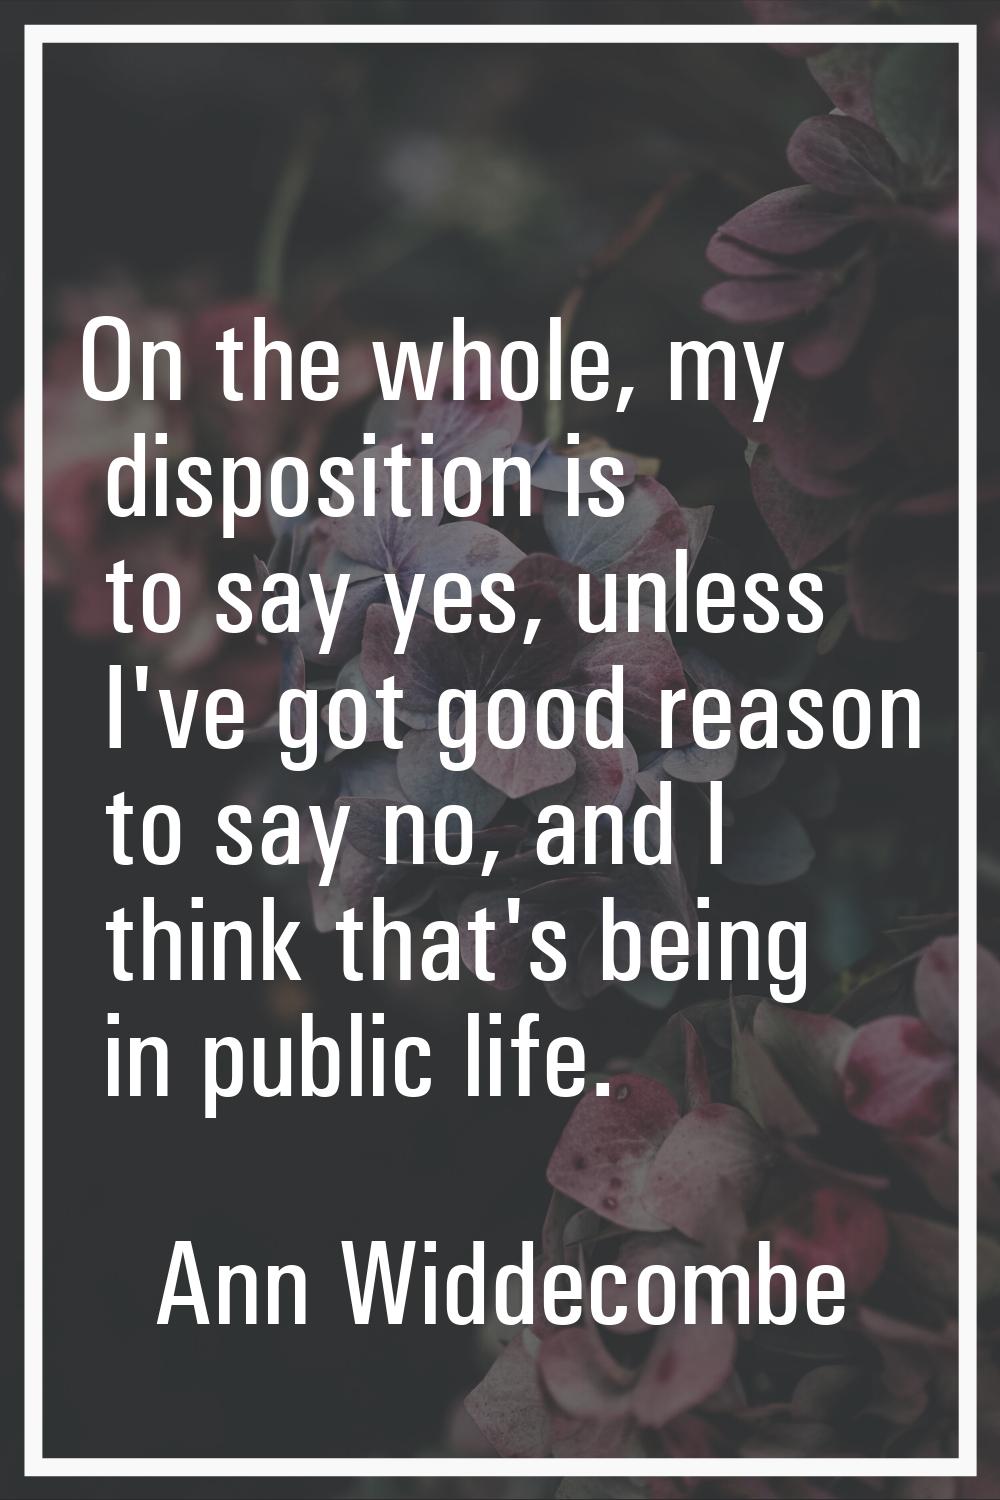 On the whole, my disposition is to say yes, unless I've got good reason to say no, and I think that